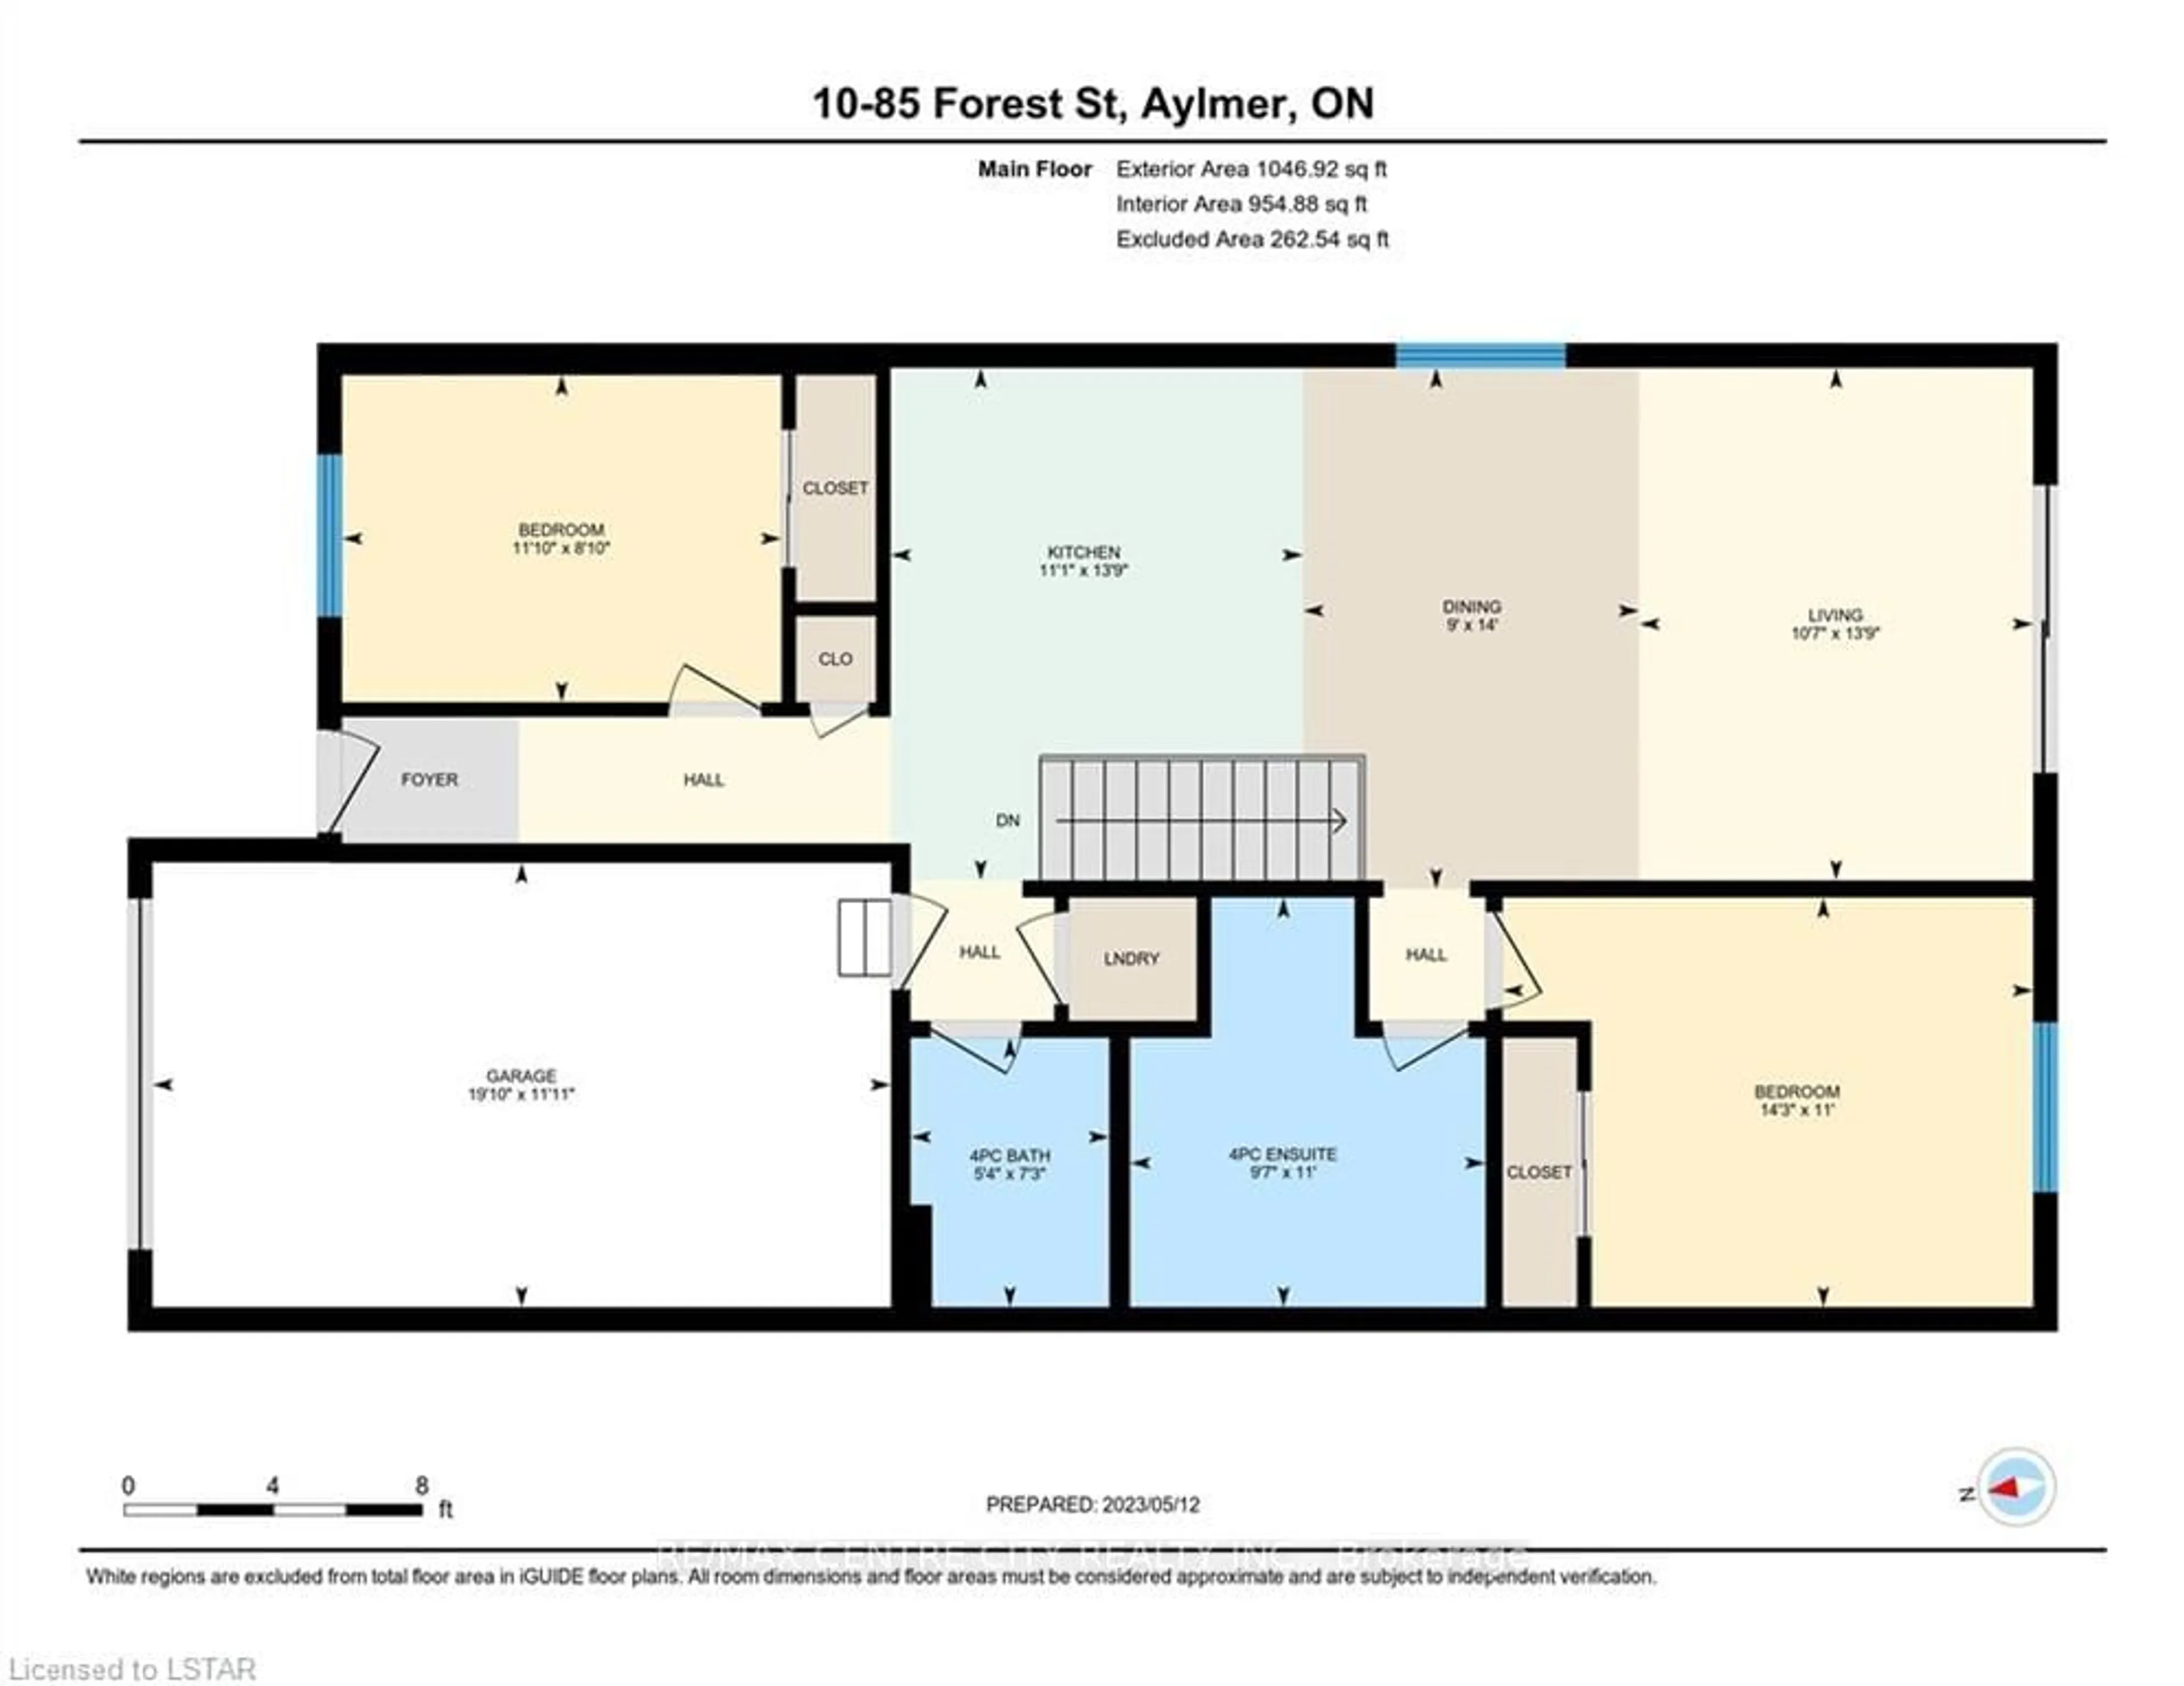 Floor plan for 85 Forest St #3, Aylmer Ontario N5H 1A5